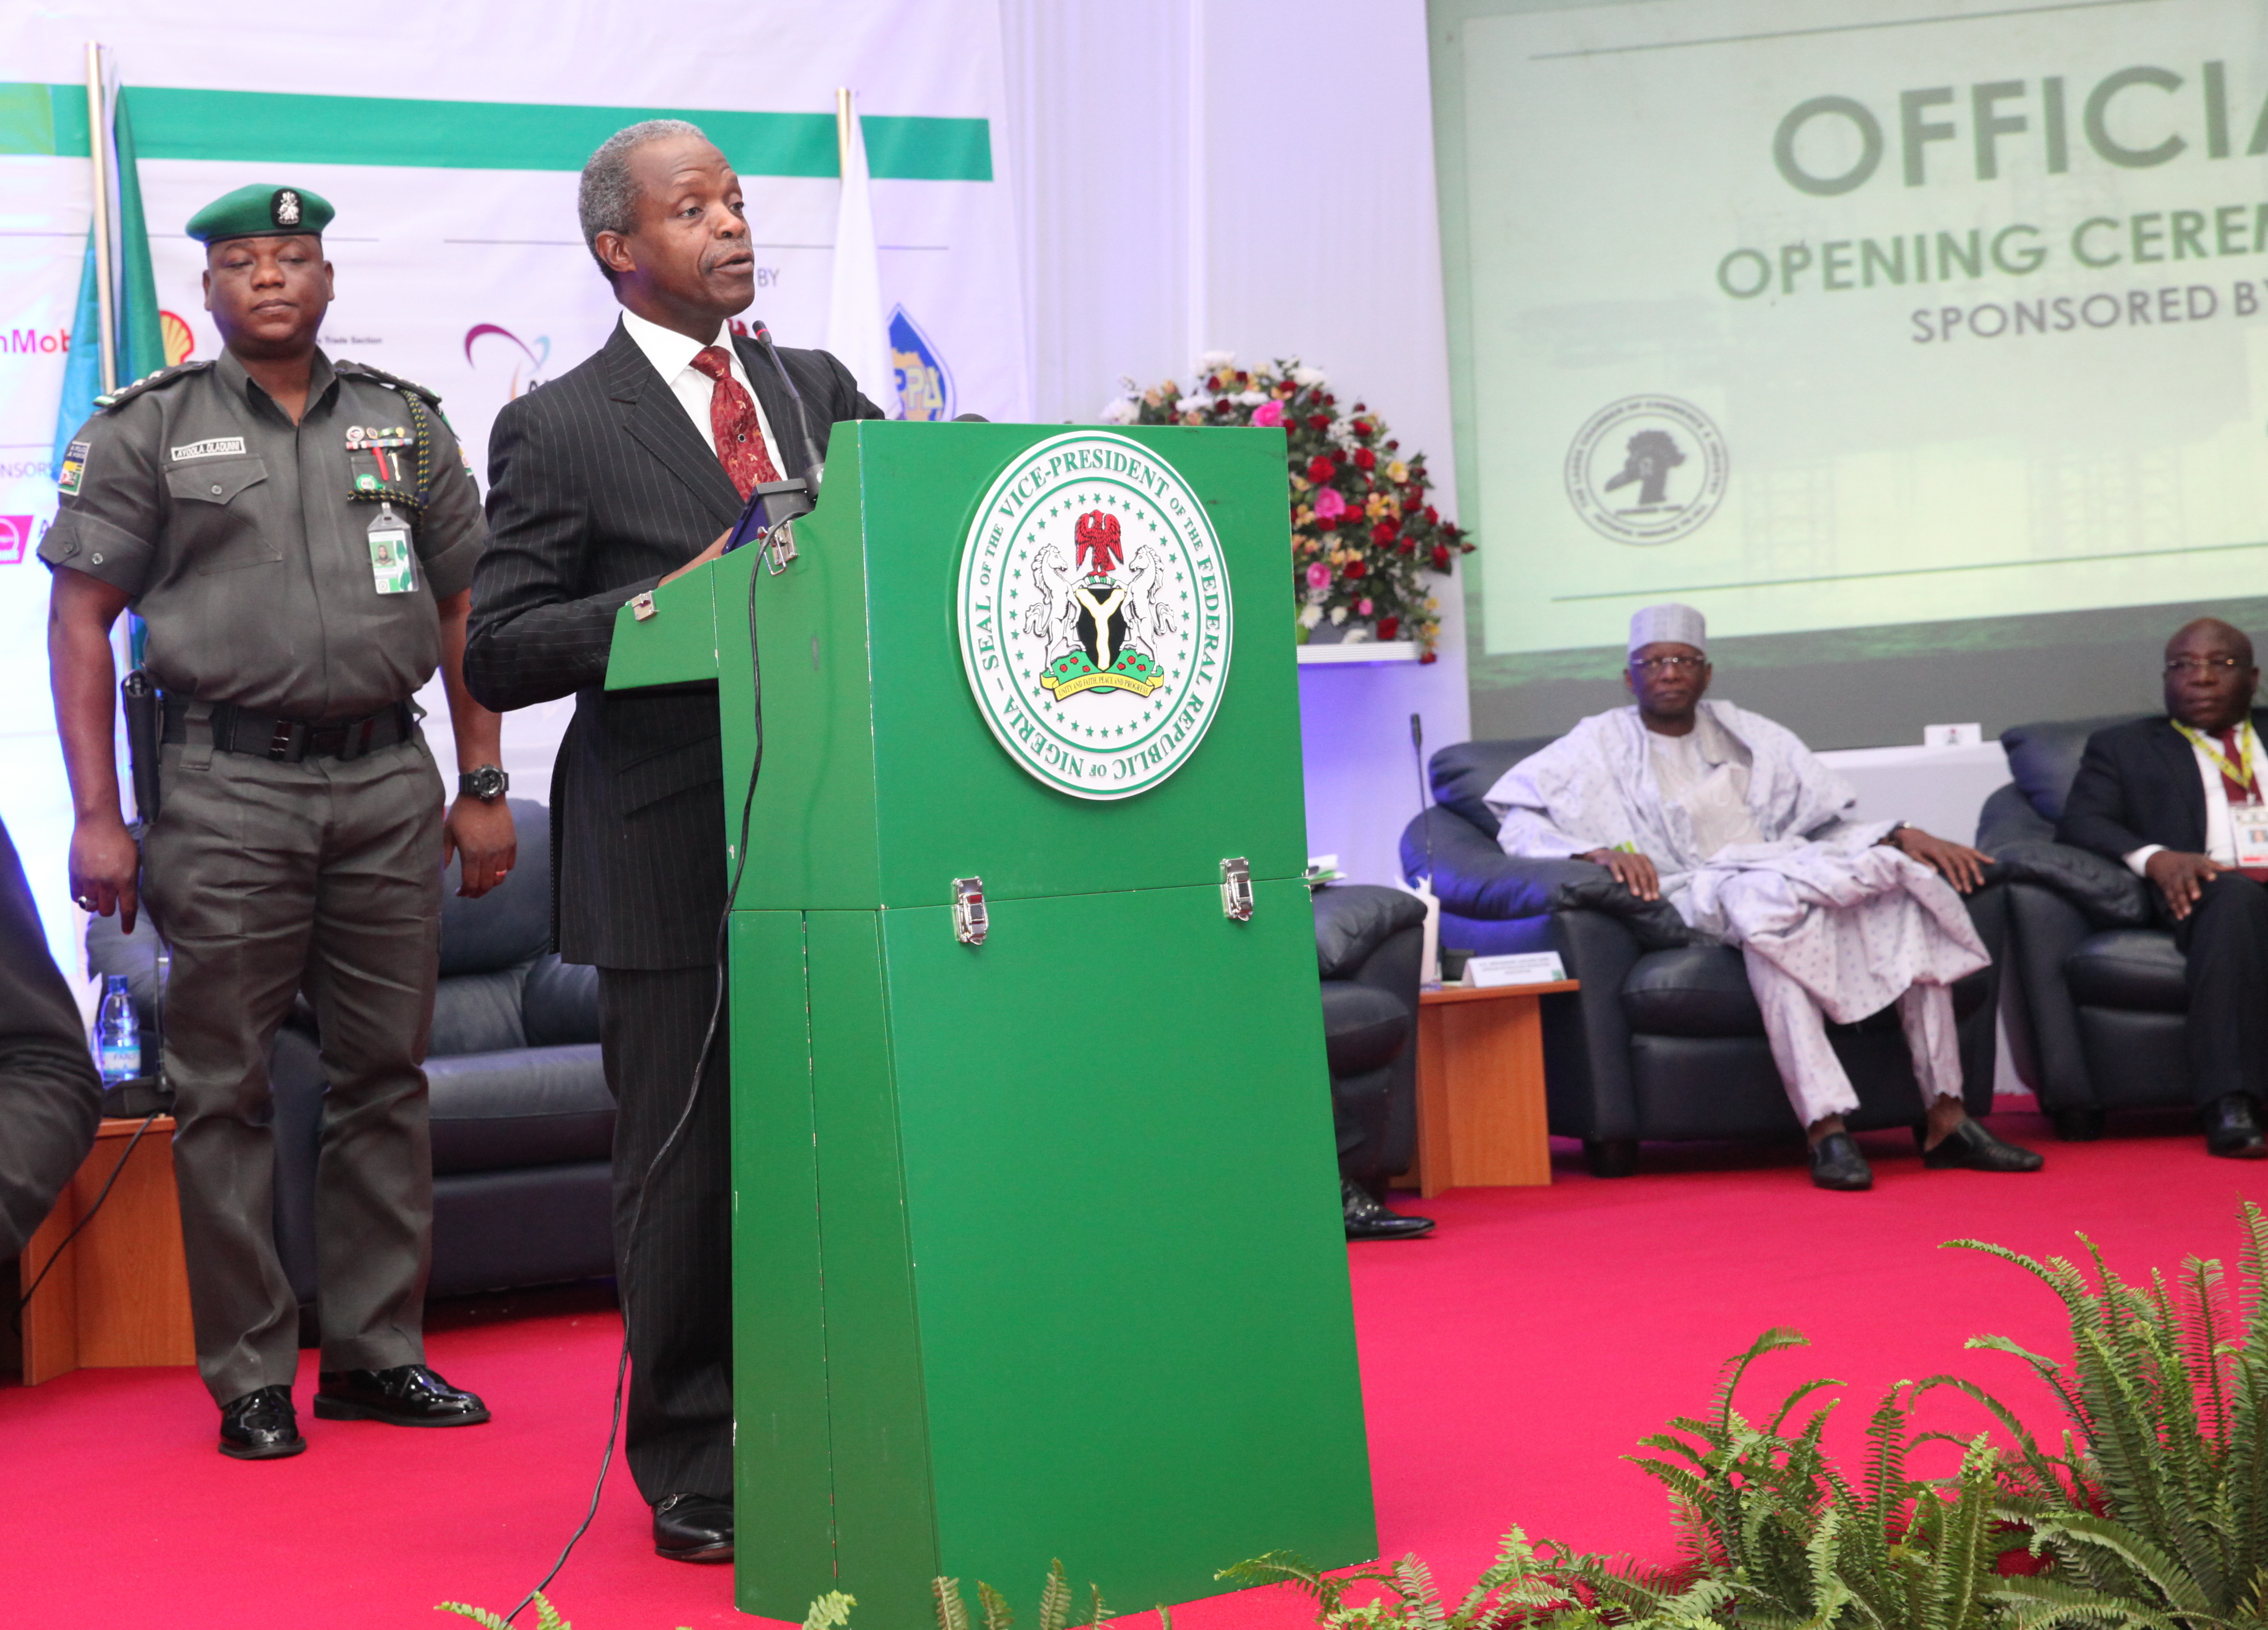 VP Osinbajo Attends The Ceremony Of The 6th African Petroleum Congress And Exhibition (CAPE VI), @ICC Abuja On 14/03/2016